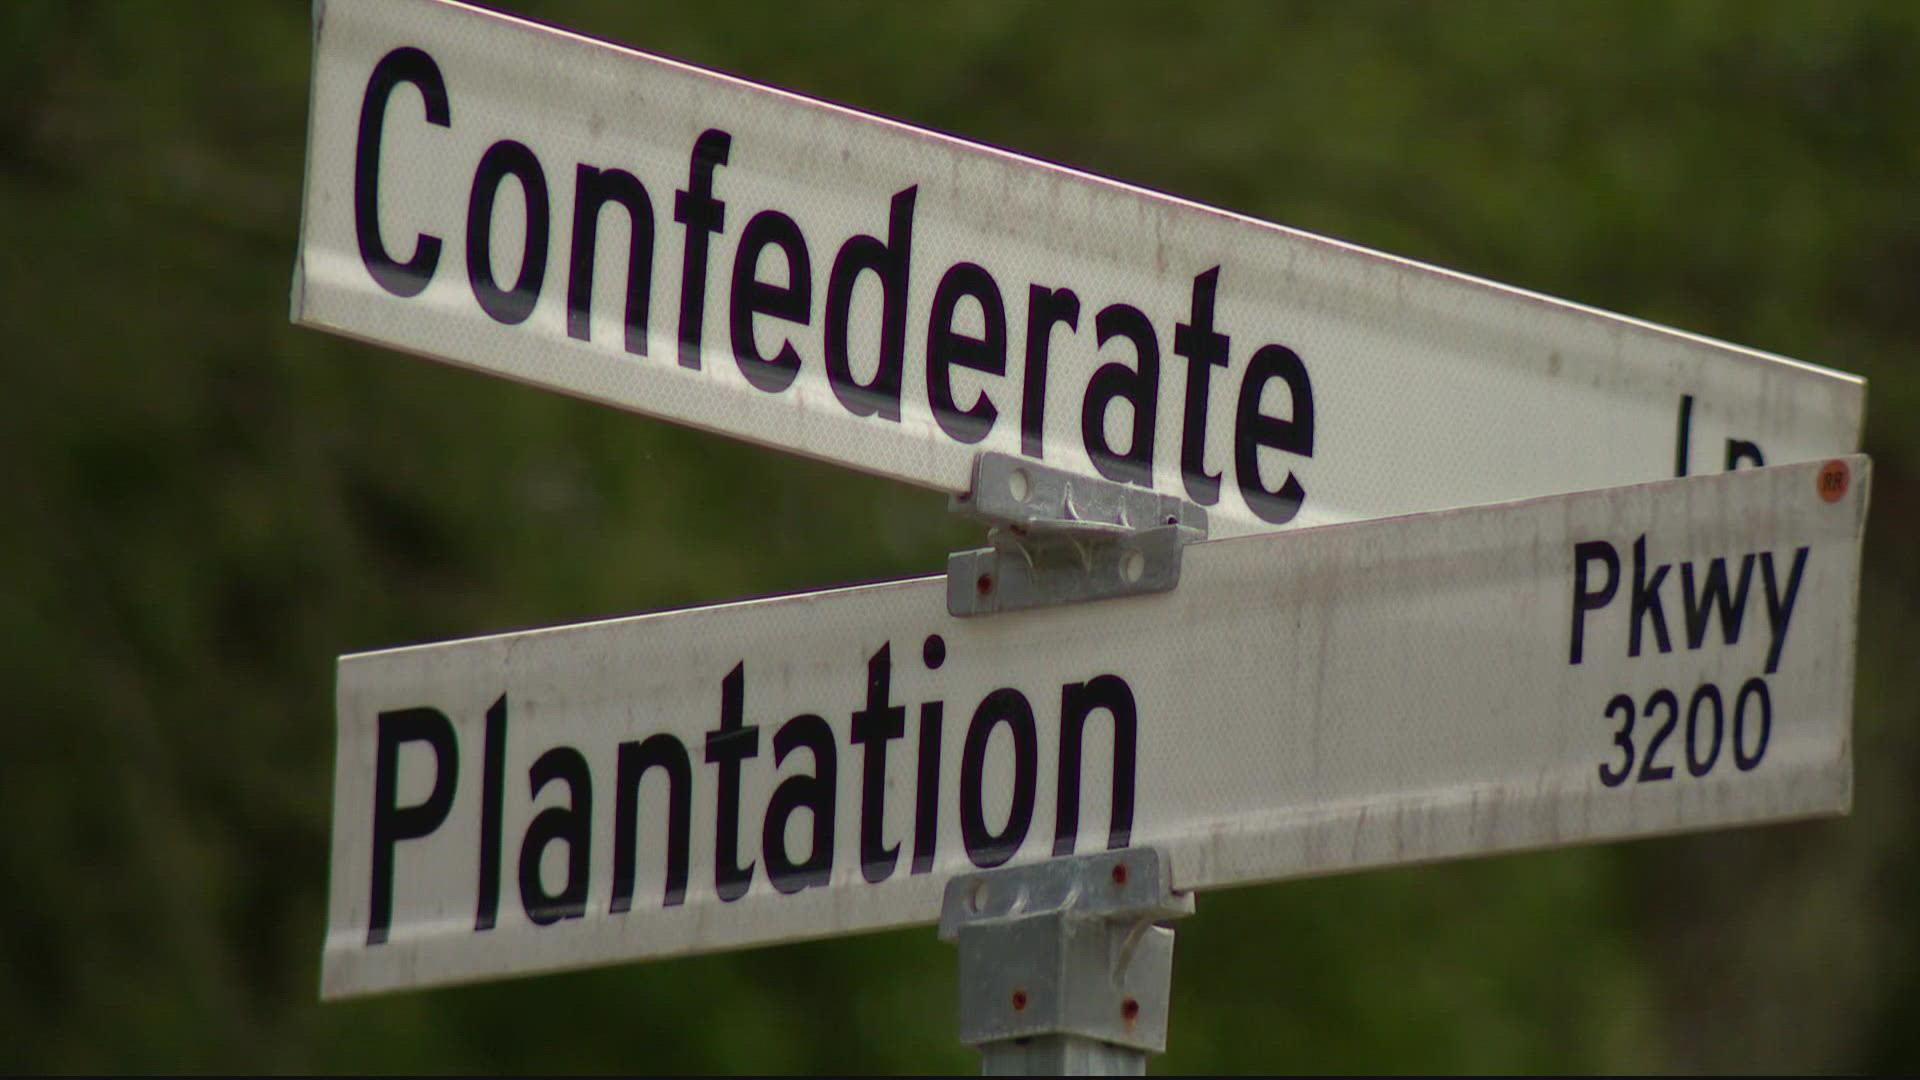 Some Fairfax neighbors want street names they find offensive and outdated changed in their historic neighborhood.